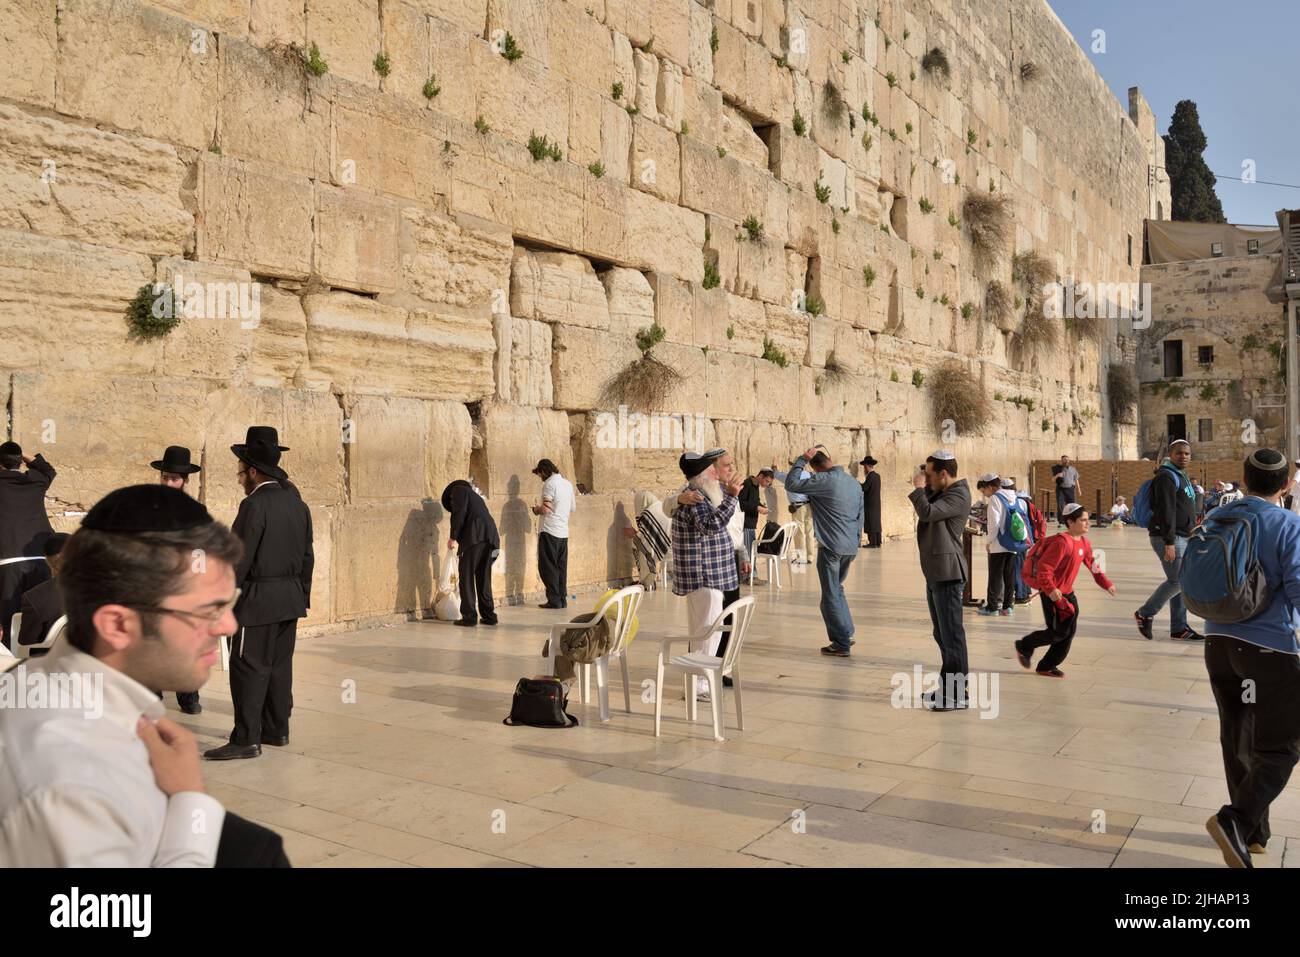 Jerusalem, Israel - March 20, 2014: Jews pray under the Western Wall in the Old city. The Old City is listed as UNESCO World Heritage site since 1981 Stock Photo